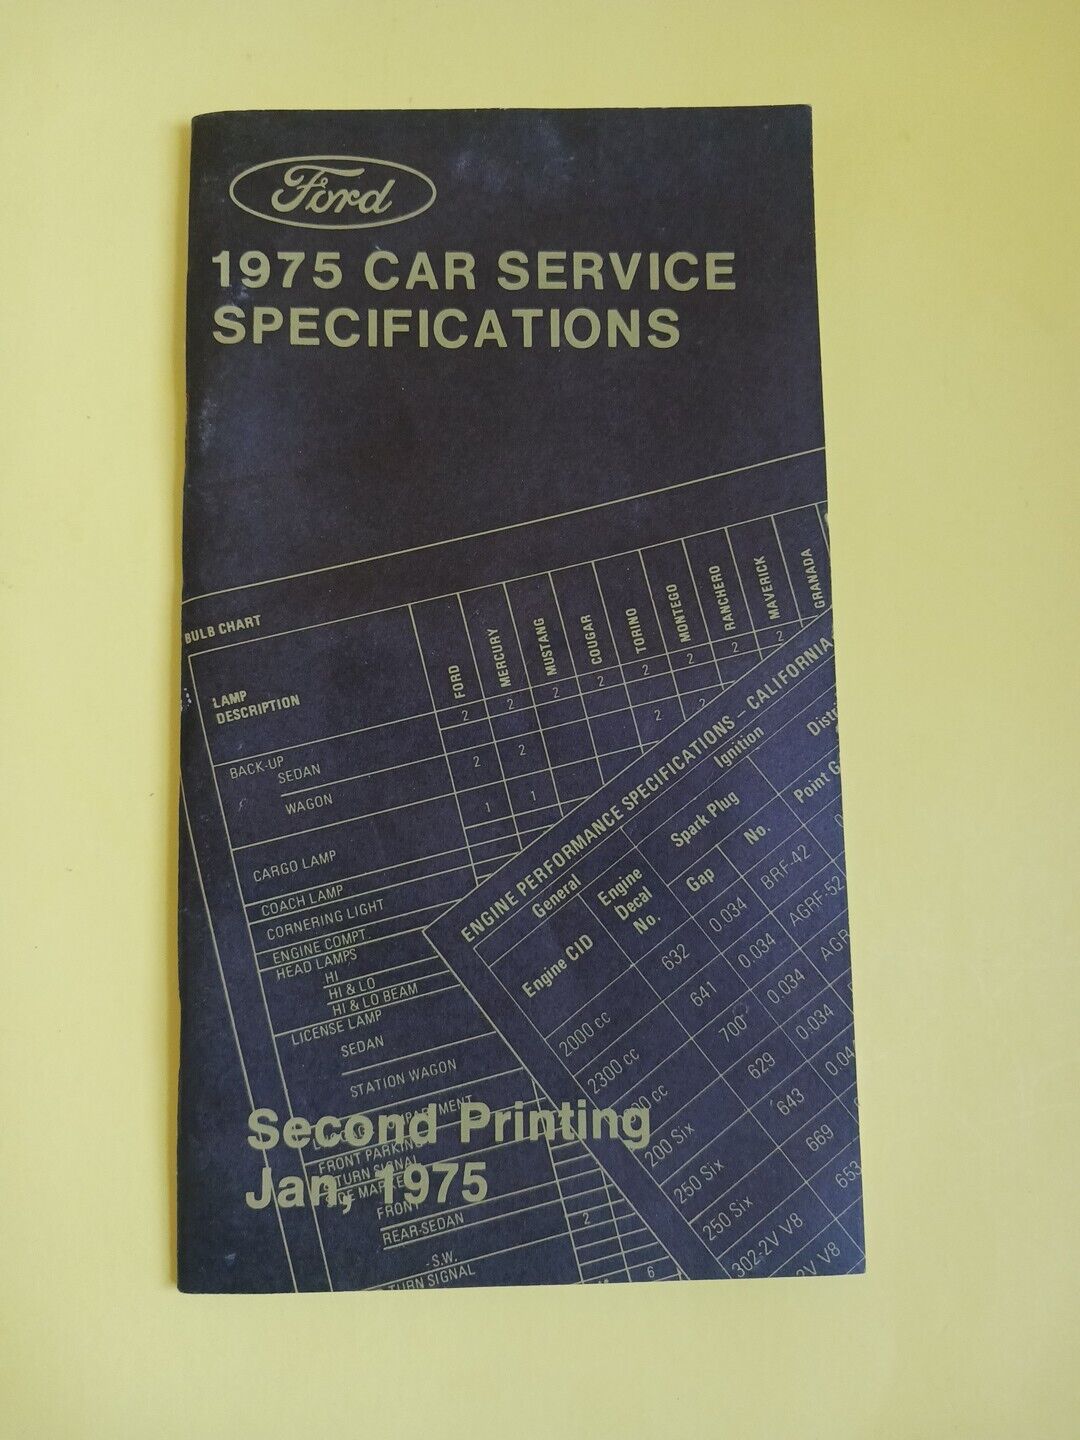 Vintage Antique Ford 1975 Car Service Specifications Manual 2nd Printing